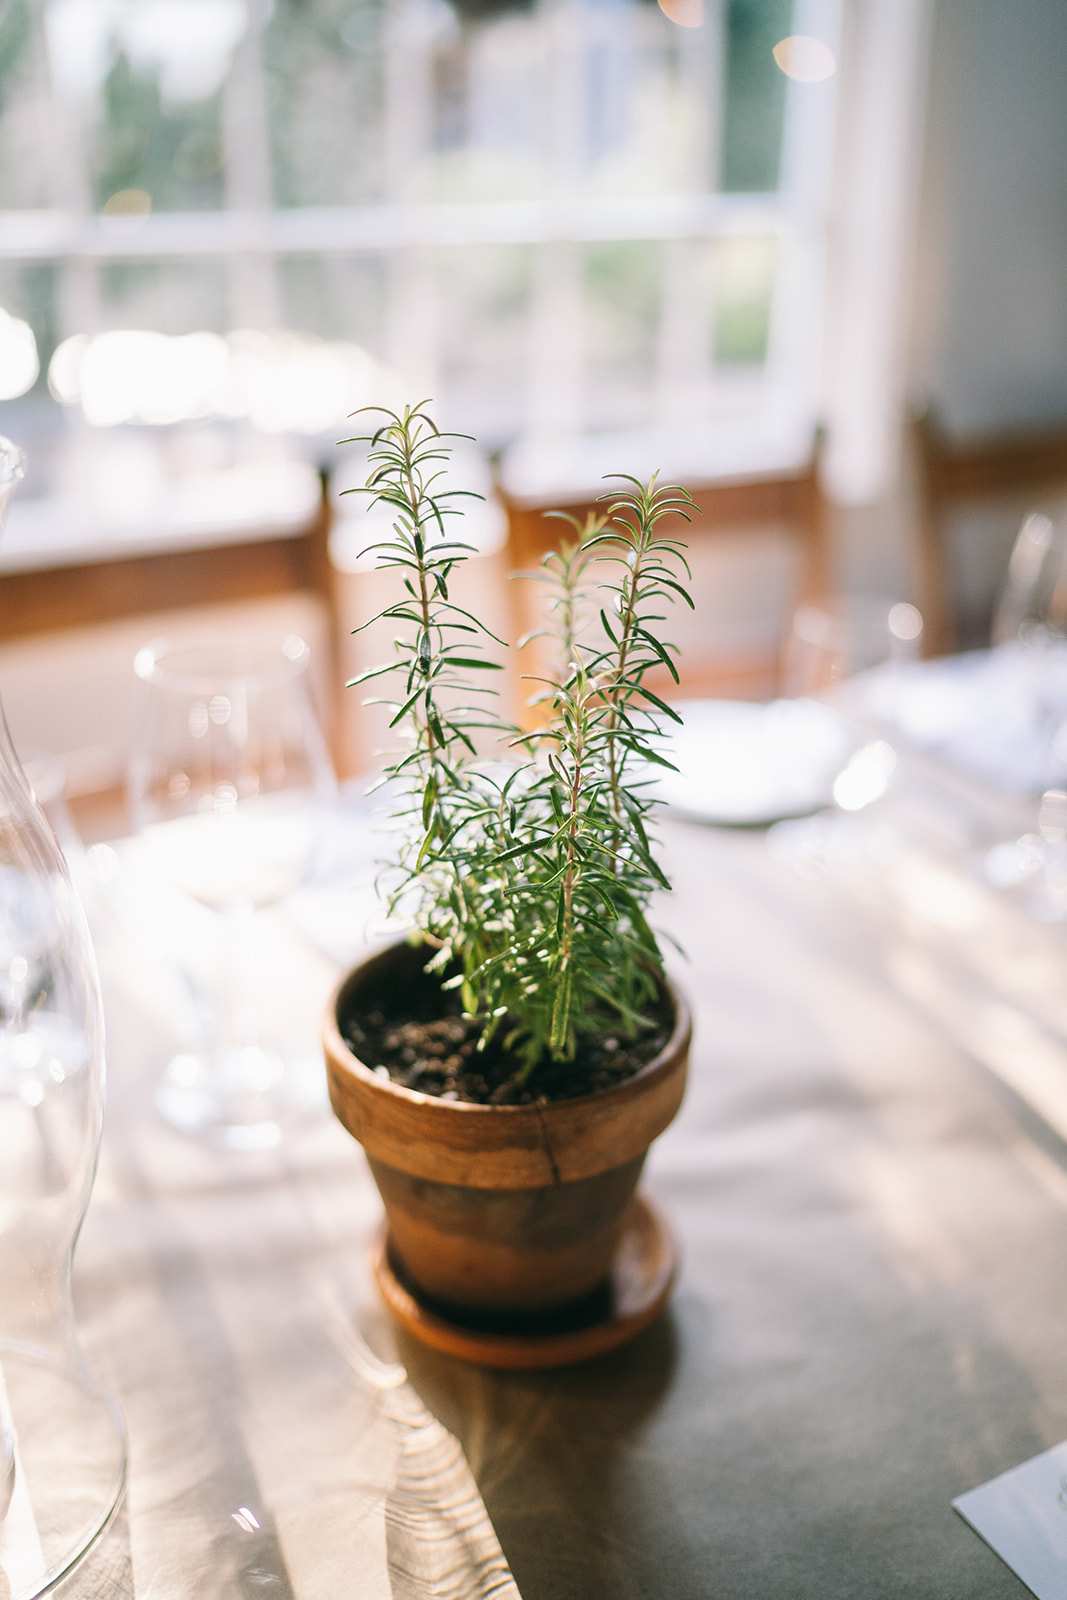 Fresh rosemary growing in a pot on the table 